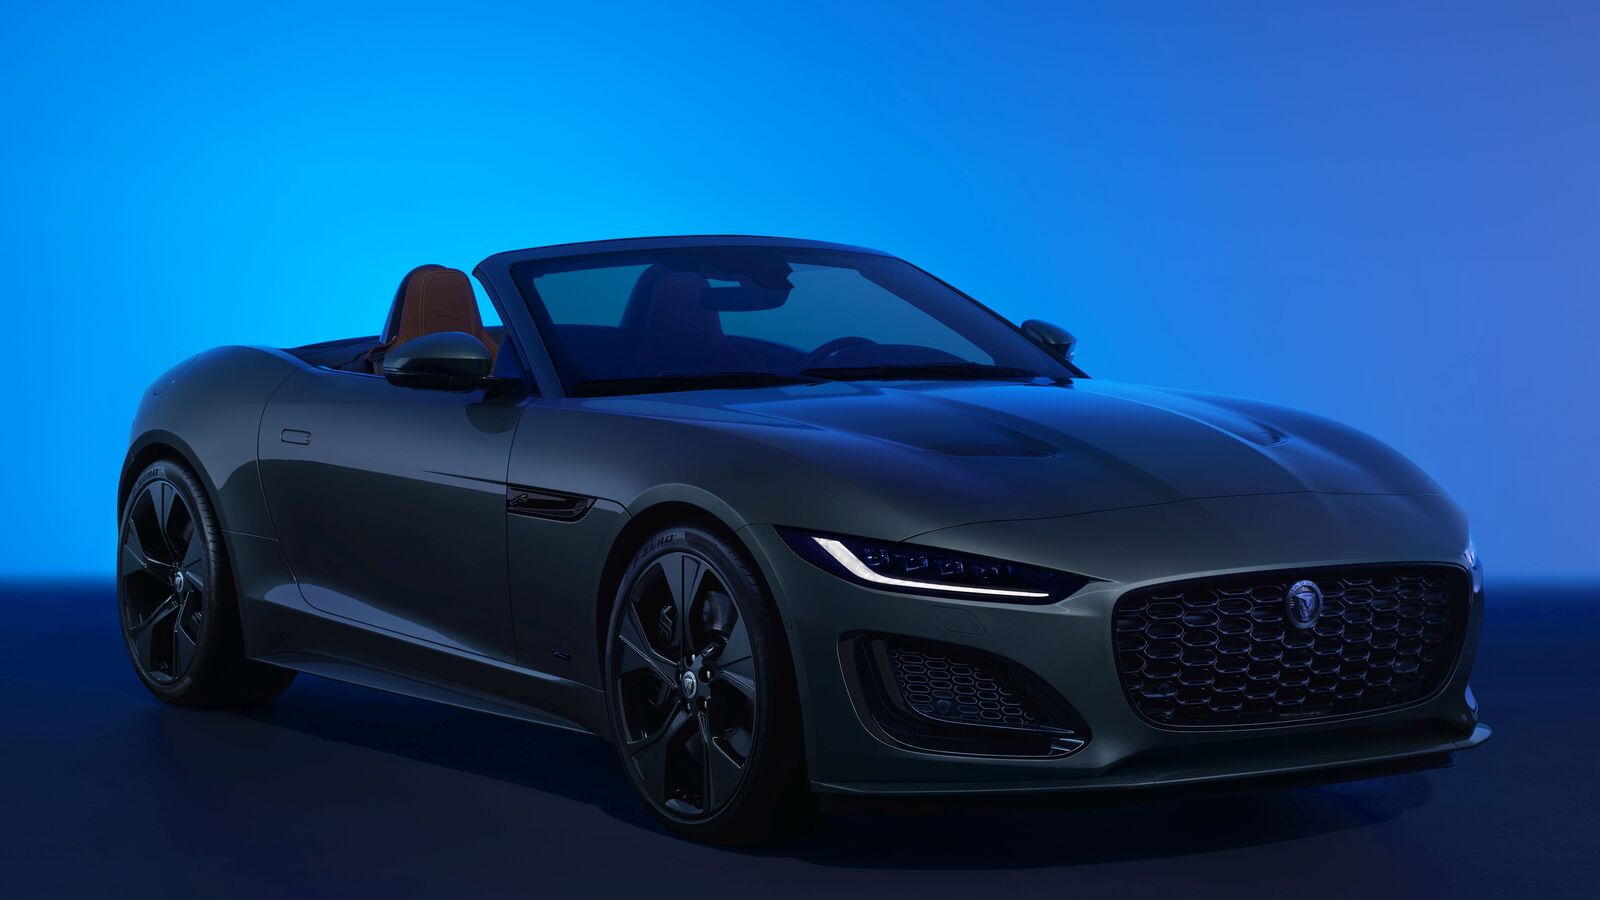 Tata's Jaguar aims to bounce back from mediocrity with a shock design. Know  more